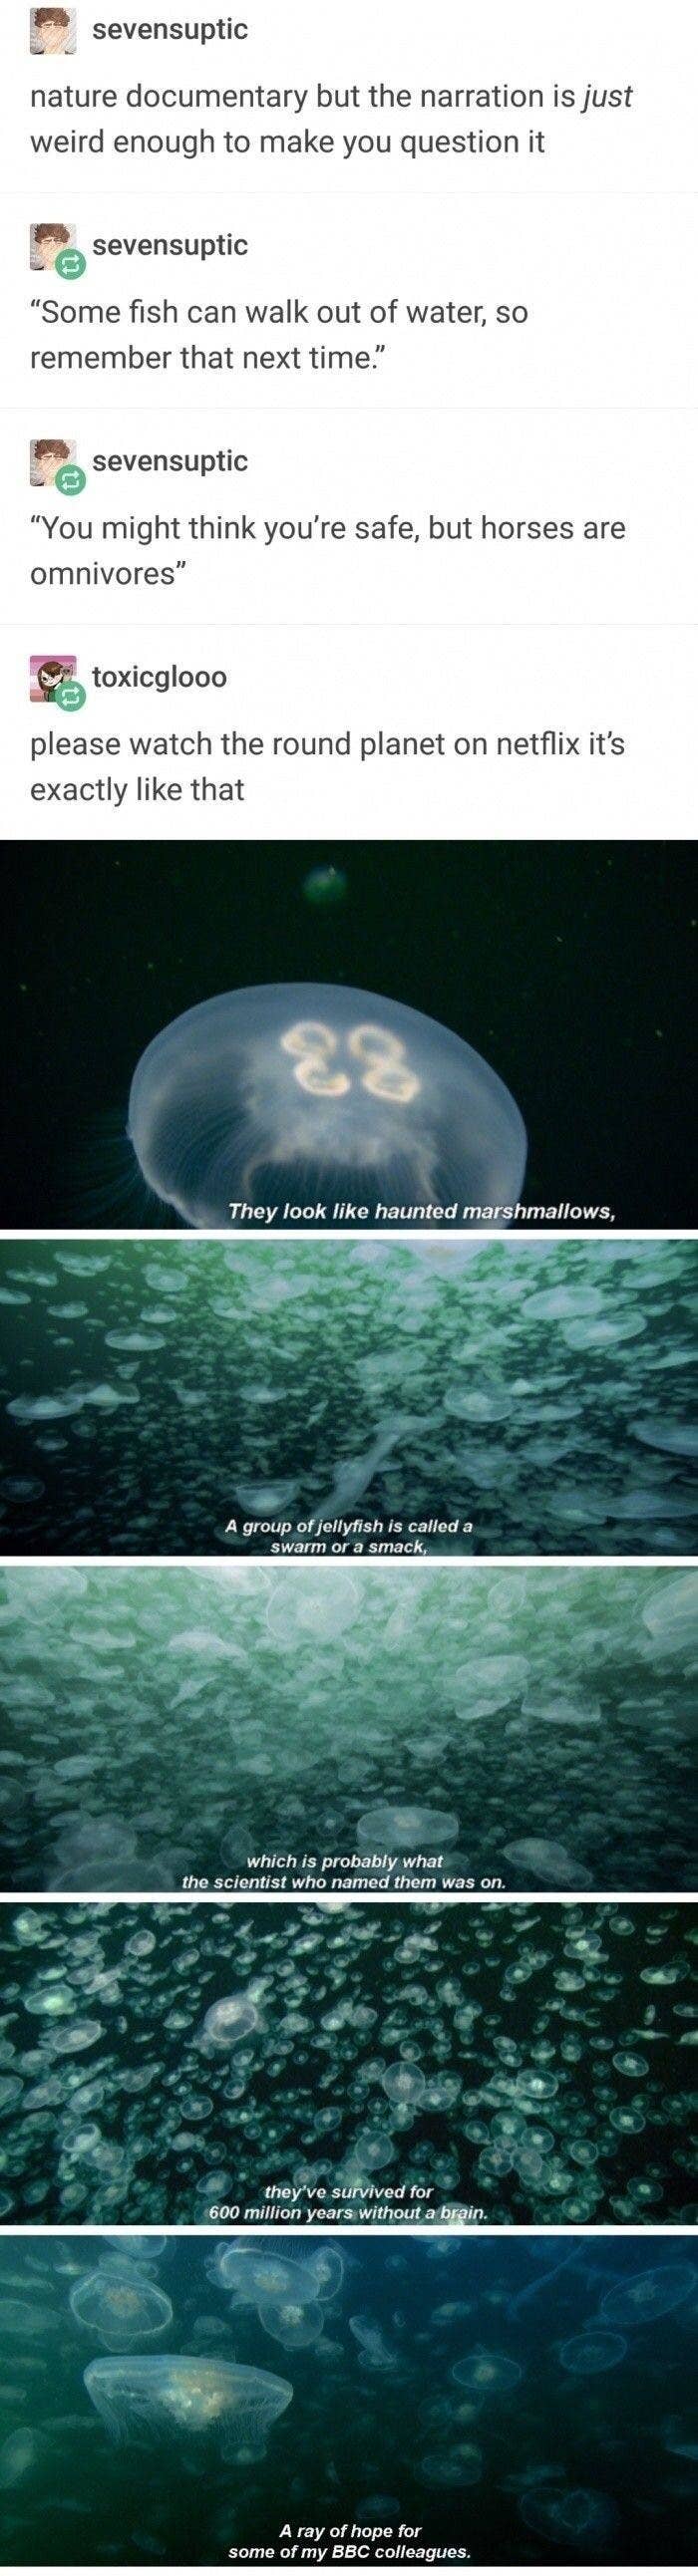 13 Times Nature Documentaries The Hell Out Of Tumblr